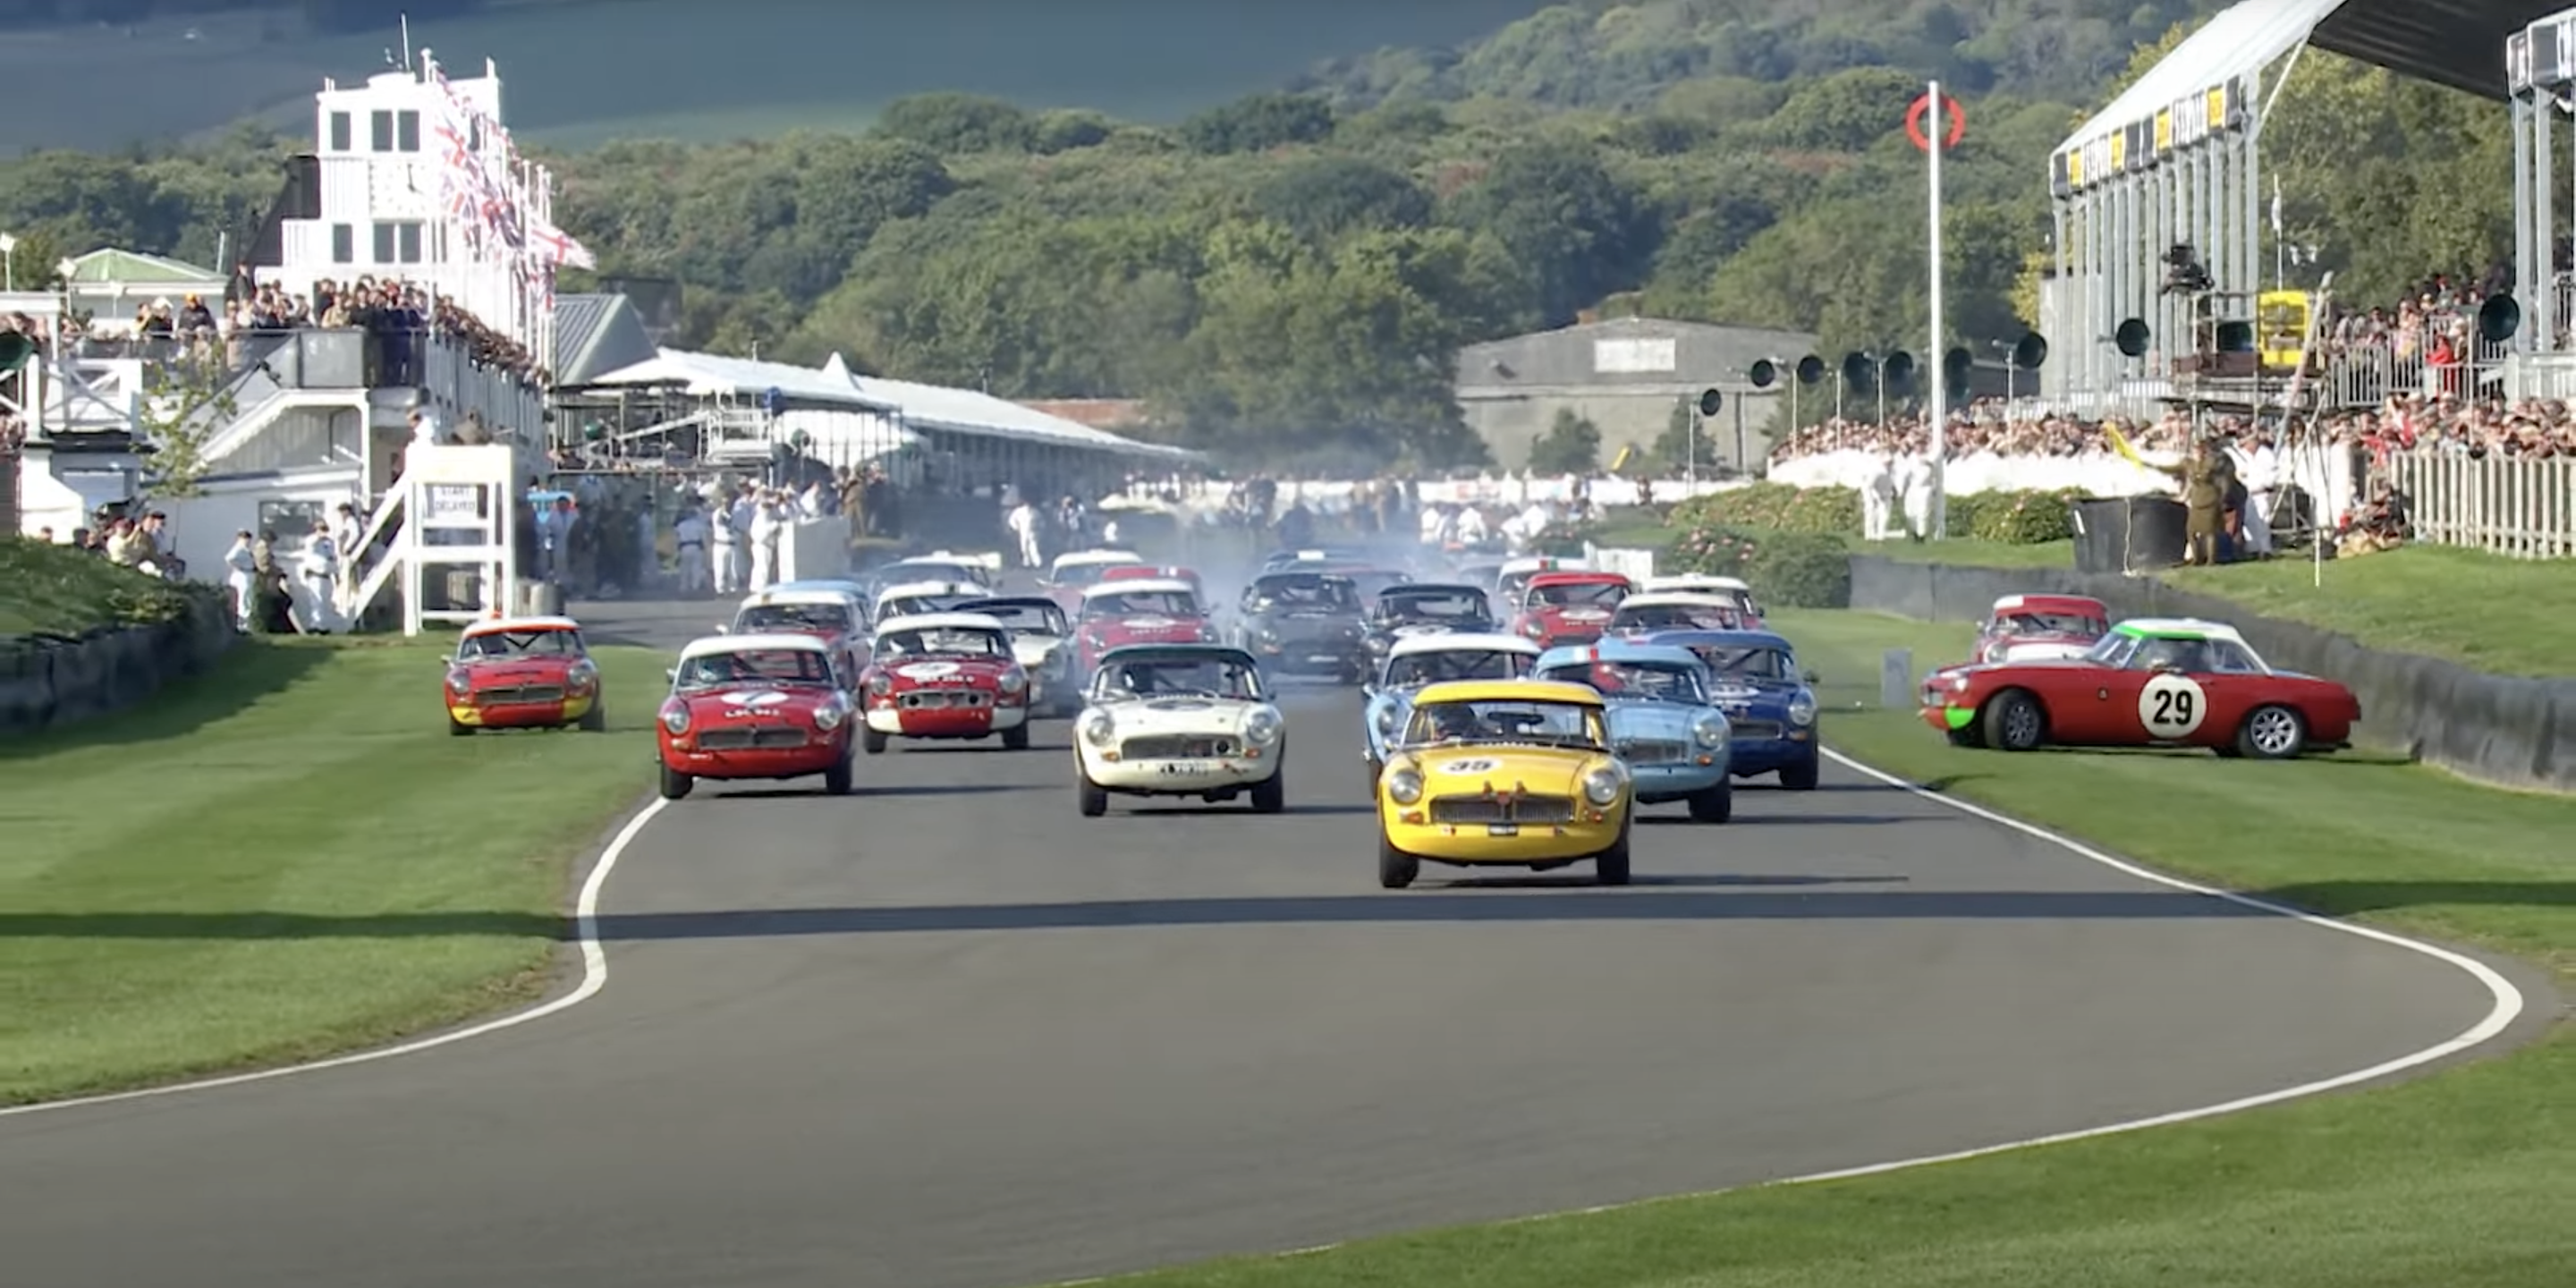 The Sheer Amount of MG Carnage in This Race is Unrivaled